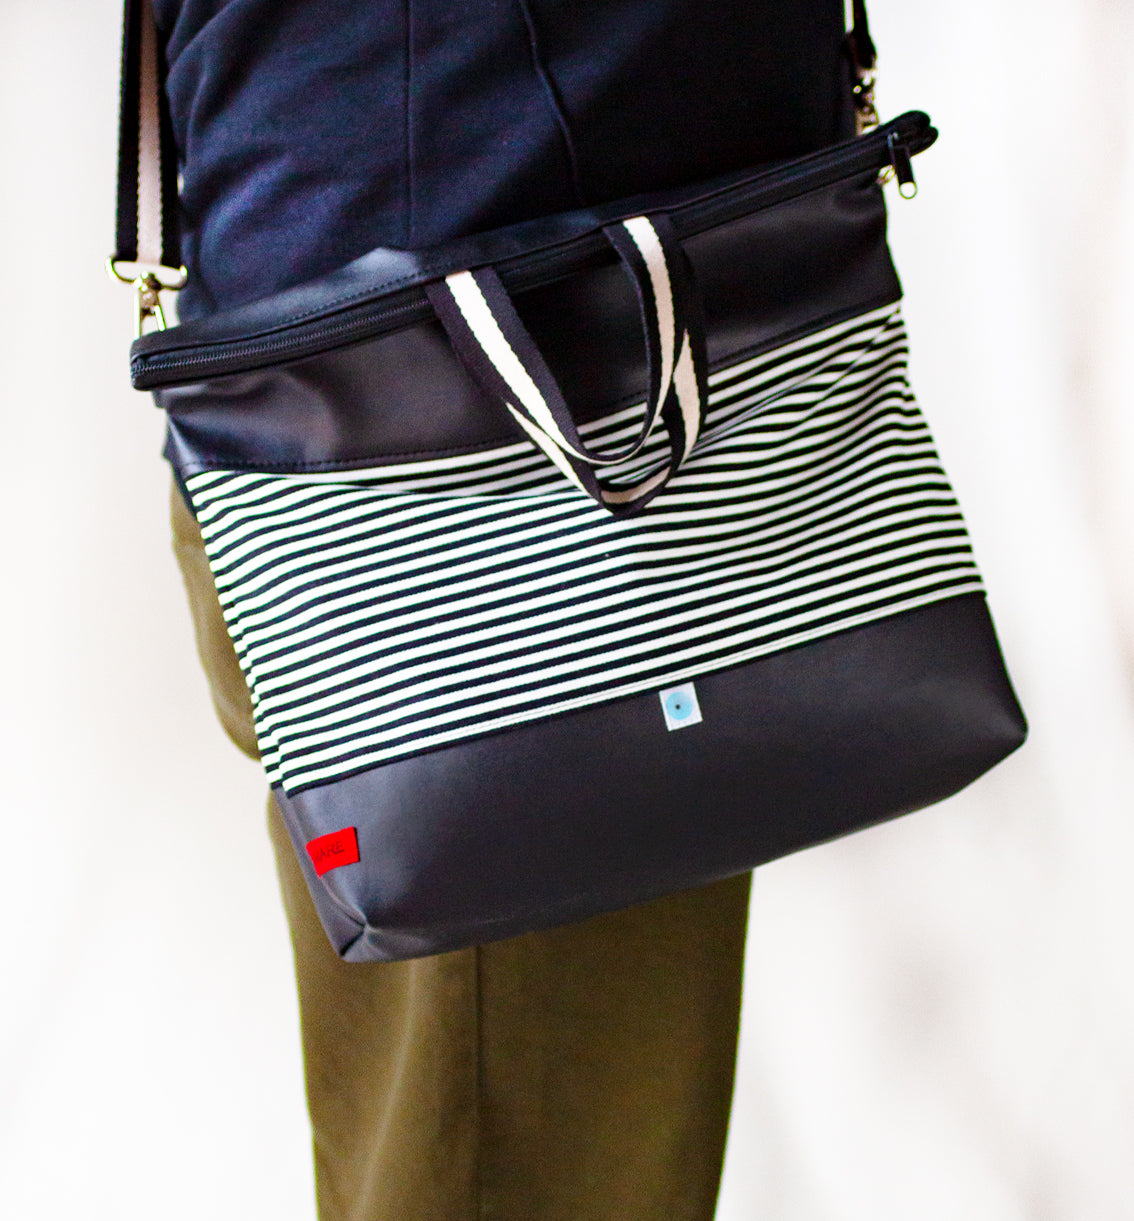 BAG WITH STRIPES